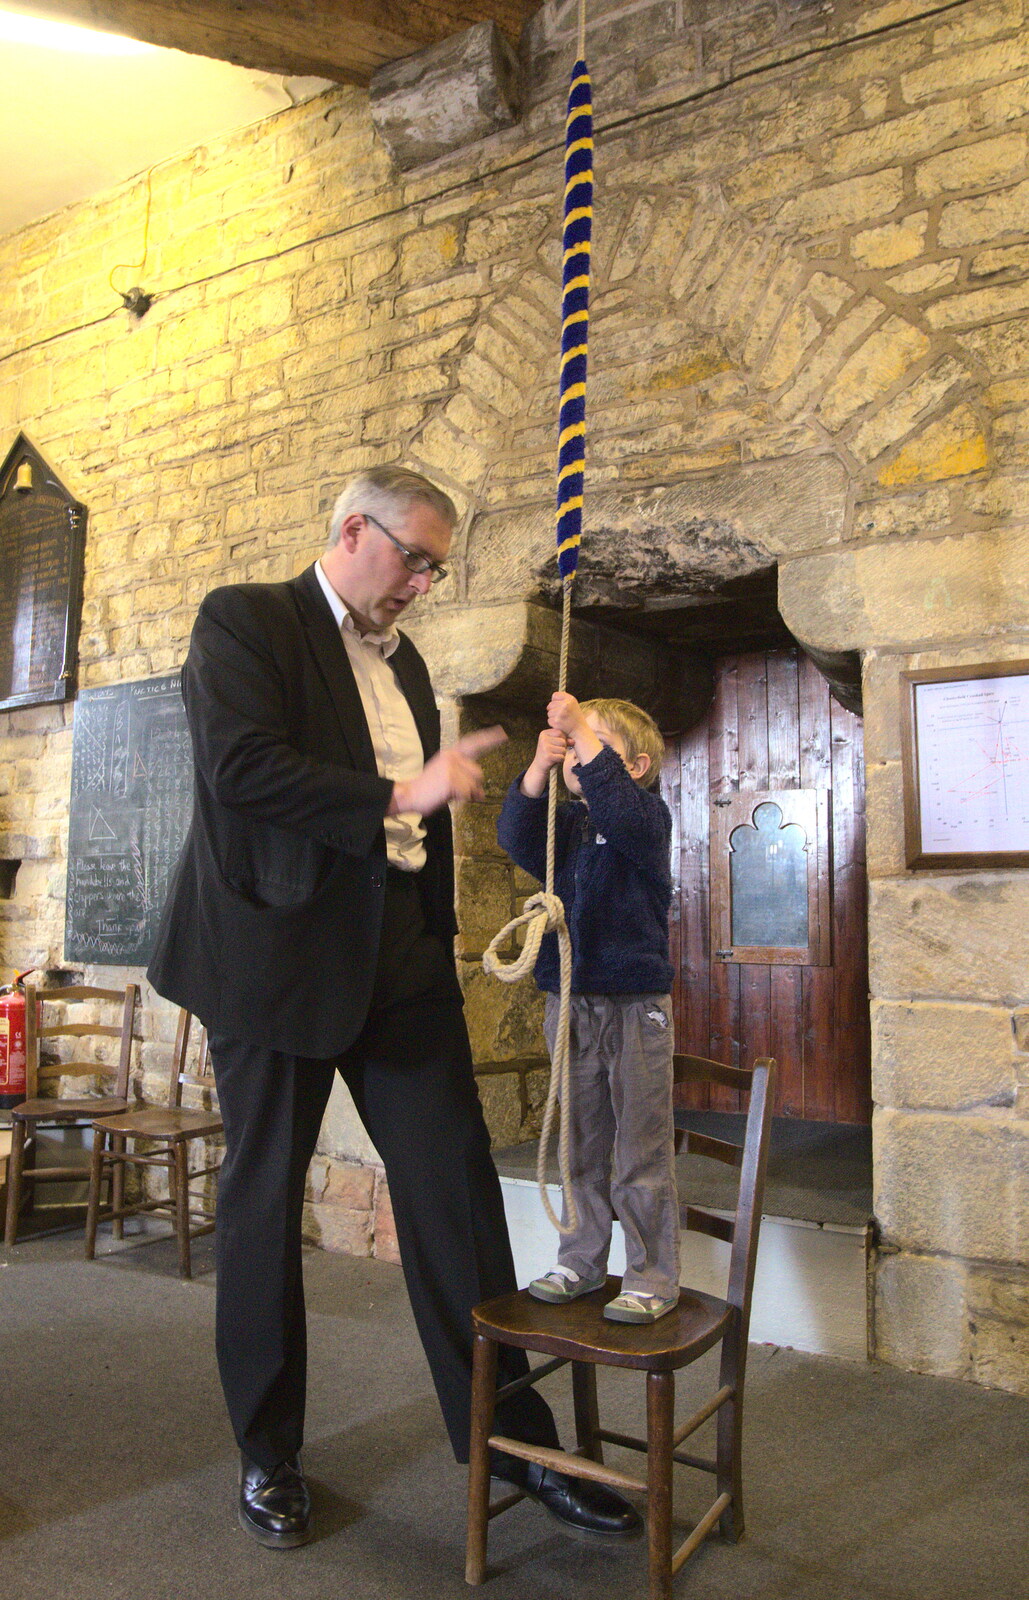 Fred gets to ring a church bell from Chesterfield and the Twisty Spire, Derbyshire - 19th April 2013